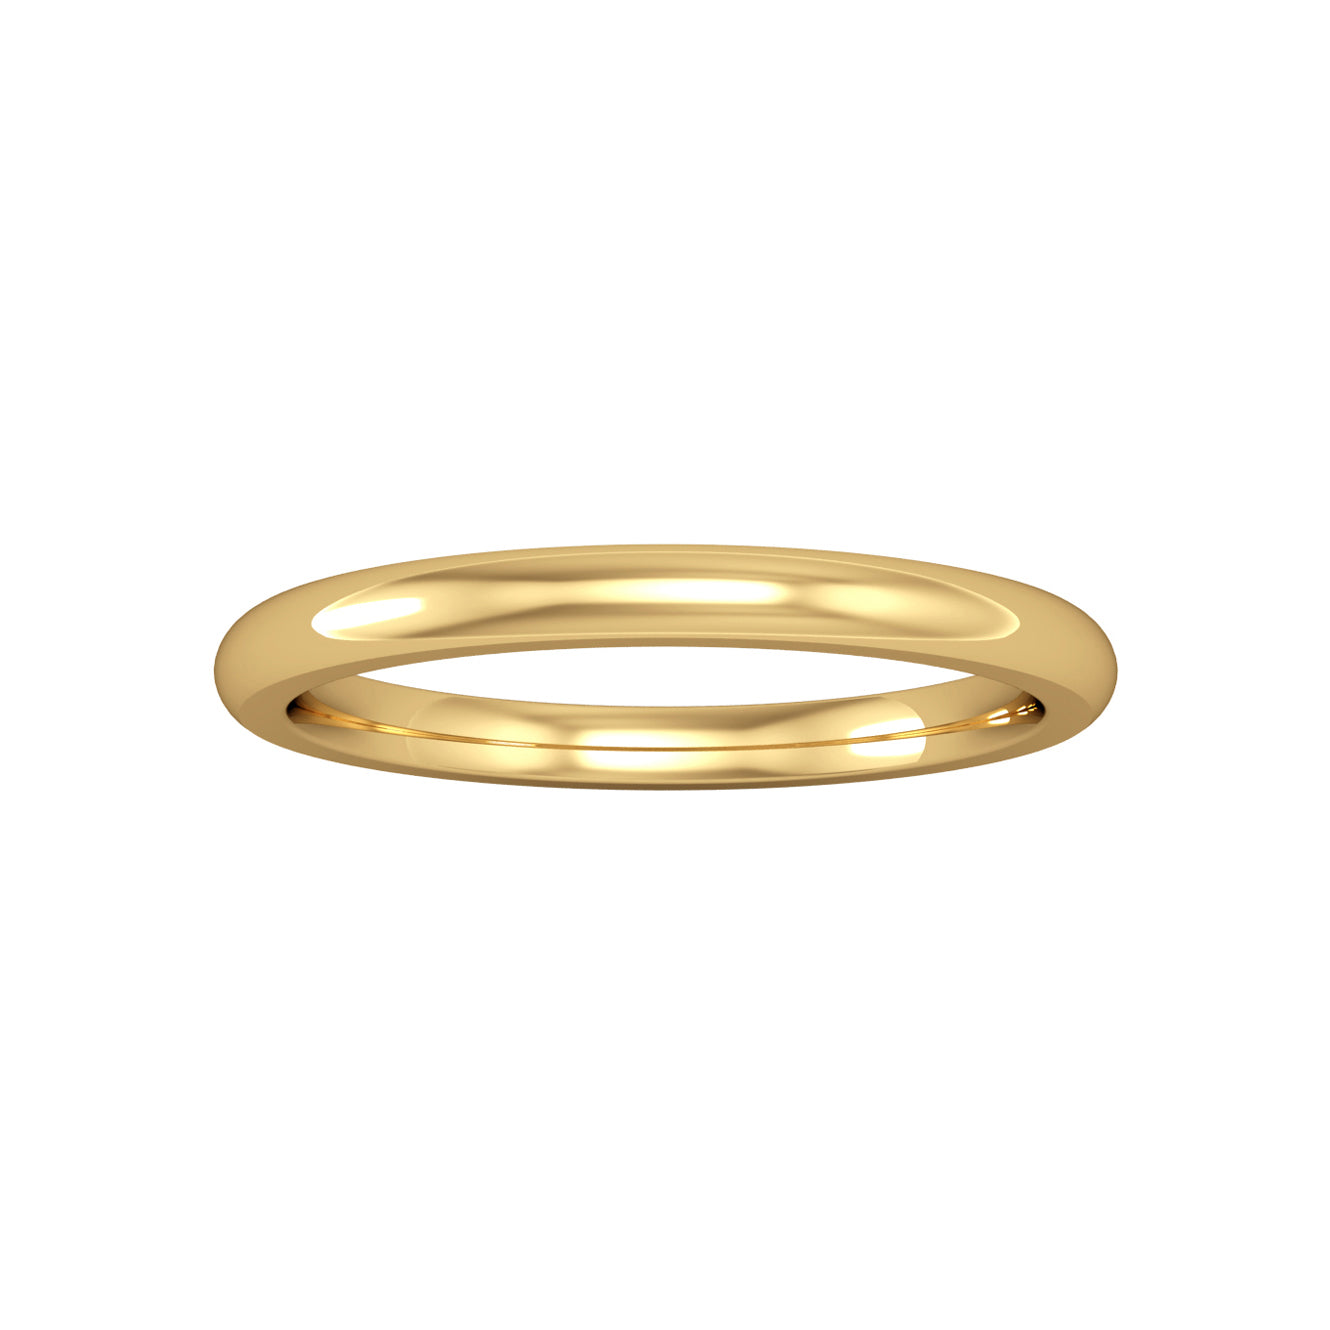 18ct Gold  2mm Court-Shaped Wedding Band Commitment Ring - RYNR0232XX